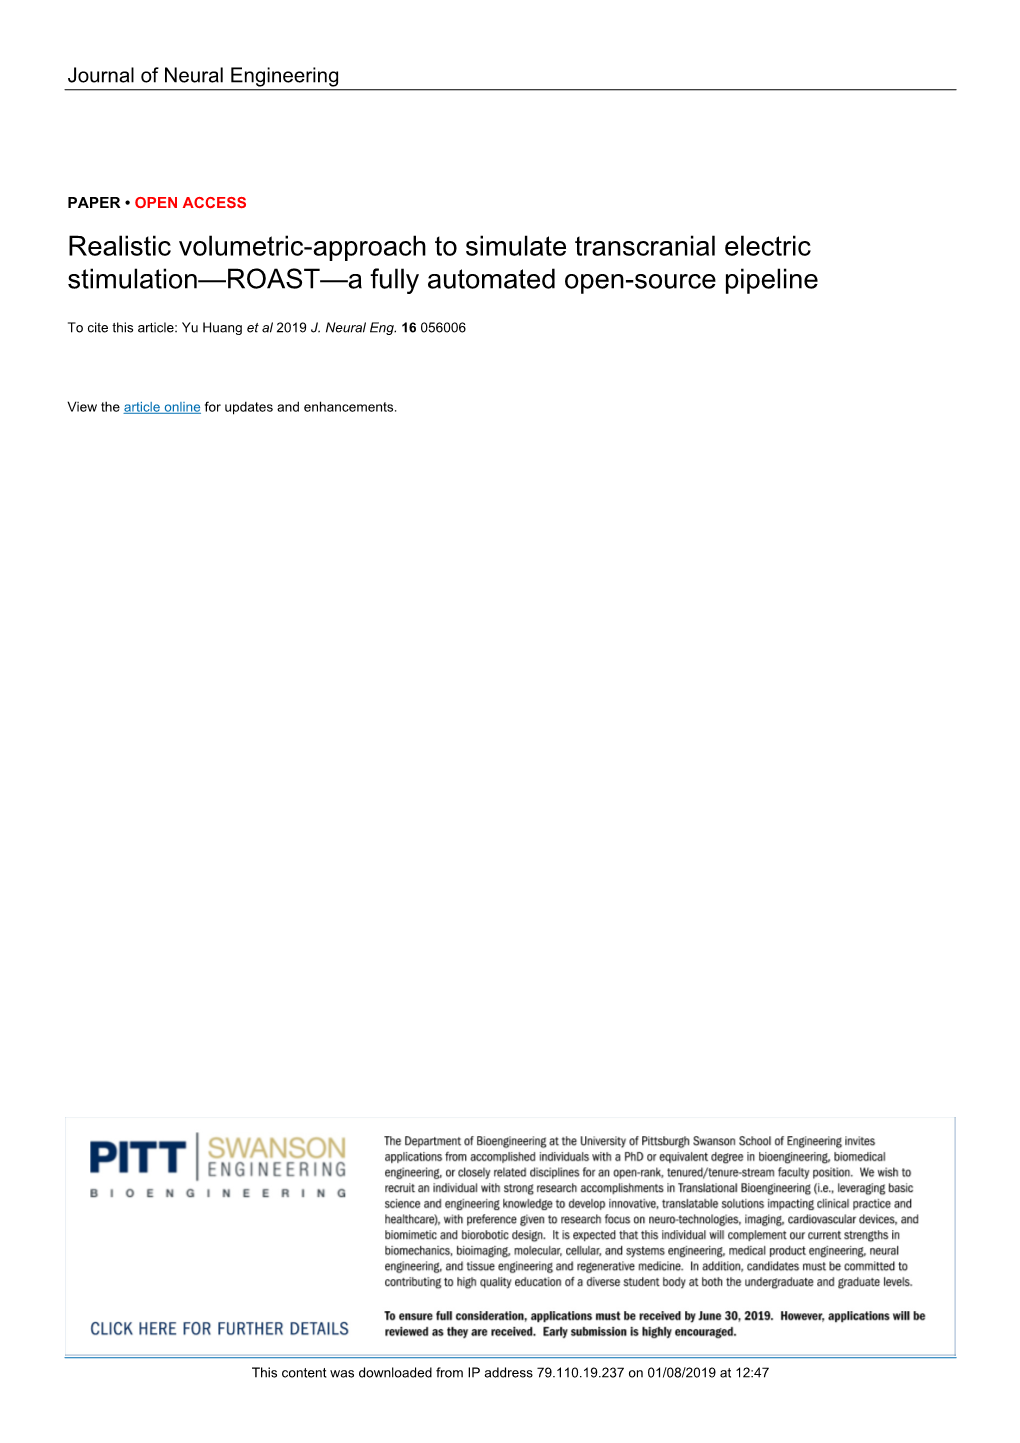 Realistic Volumetric-Approach to Simulate Transcranial Electric Stimulation—ROAST—A Fully Automated Open-Source Pipeline